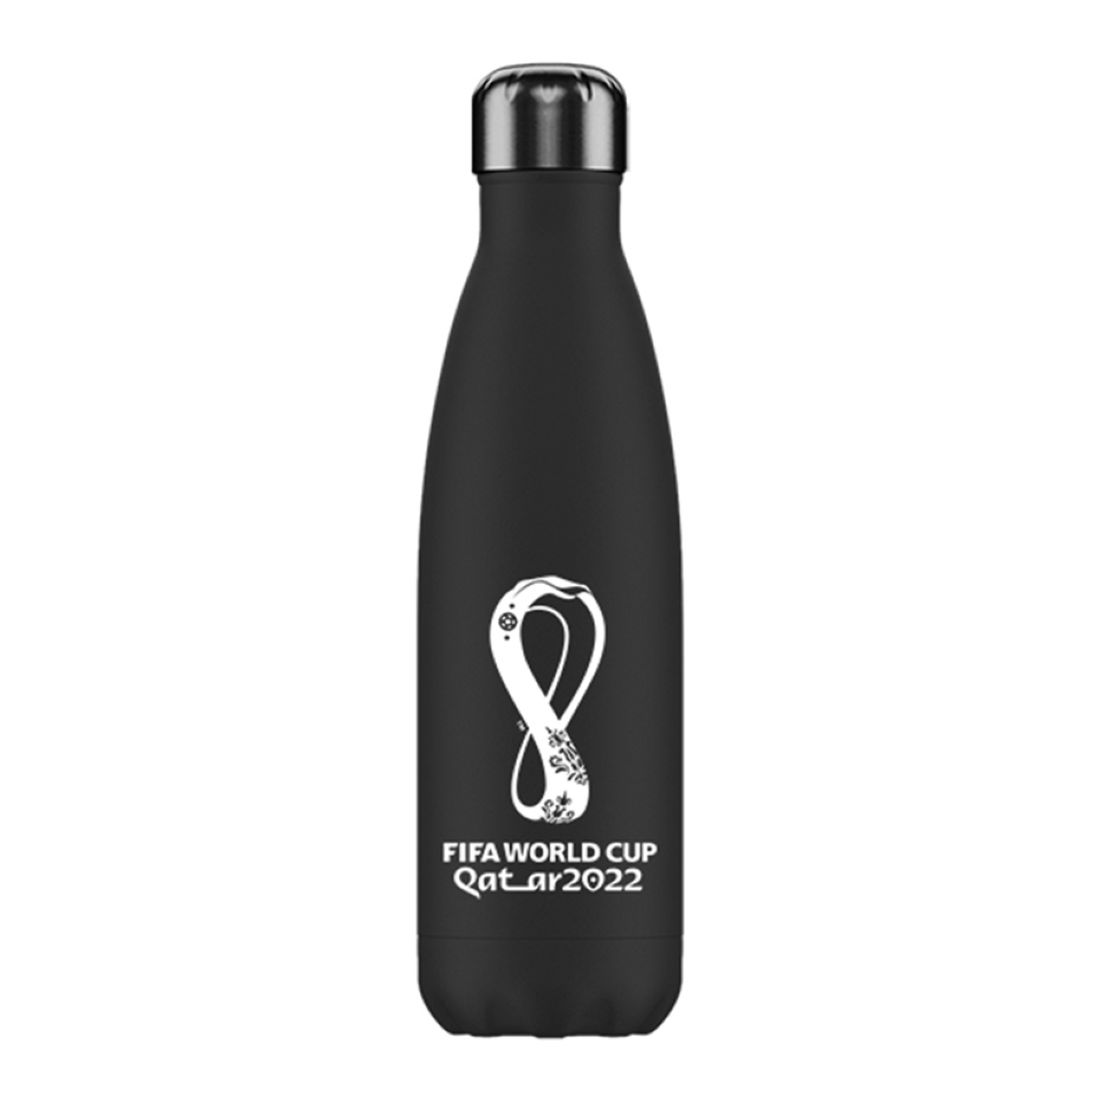 Fifa World Cup 2022 Printed Vacuum Double Wall Stainless Steel Bottle - Black 500 ml